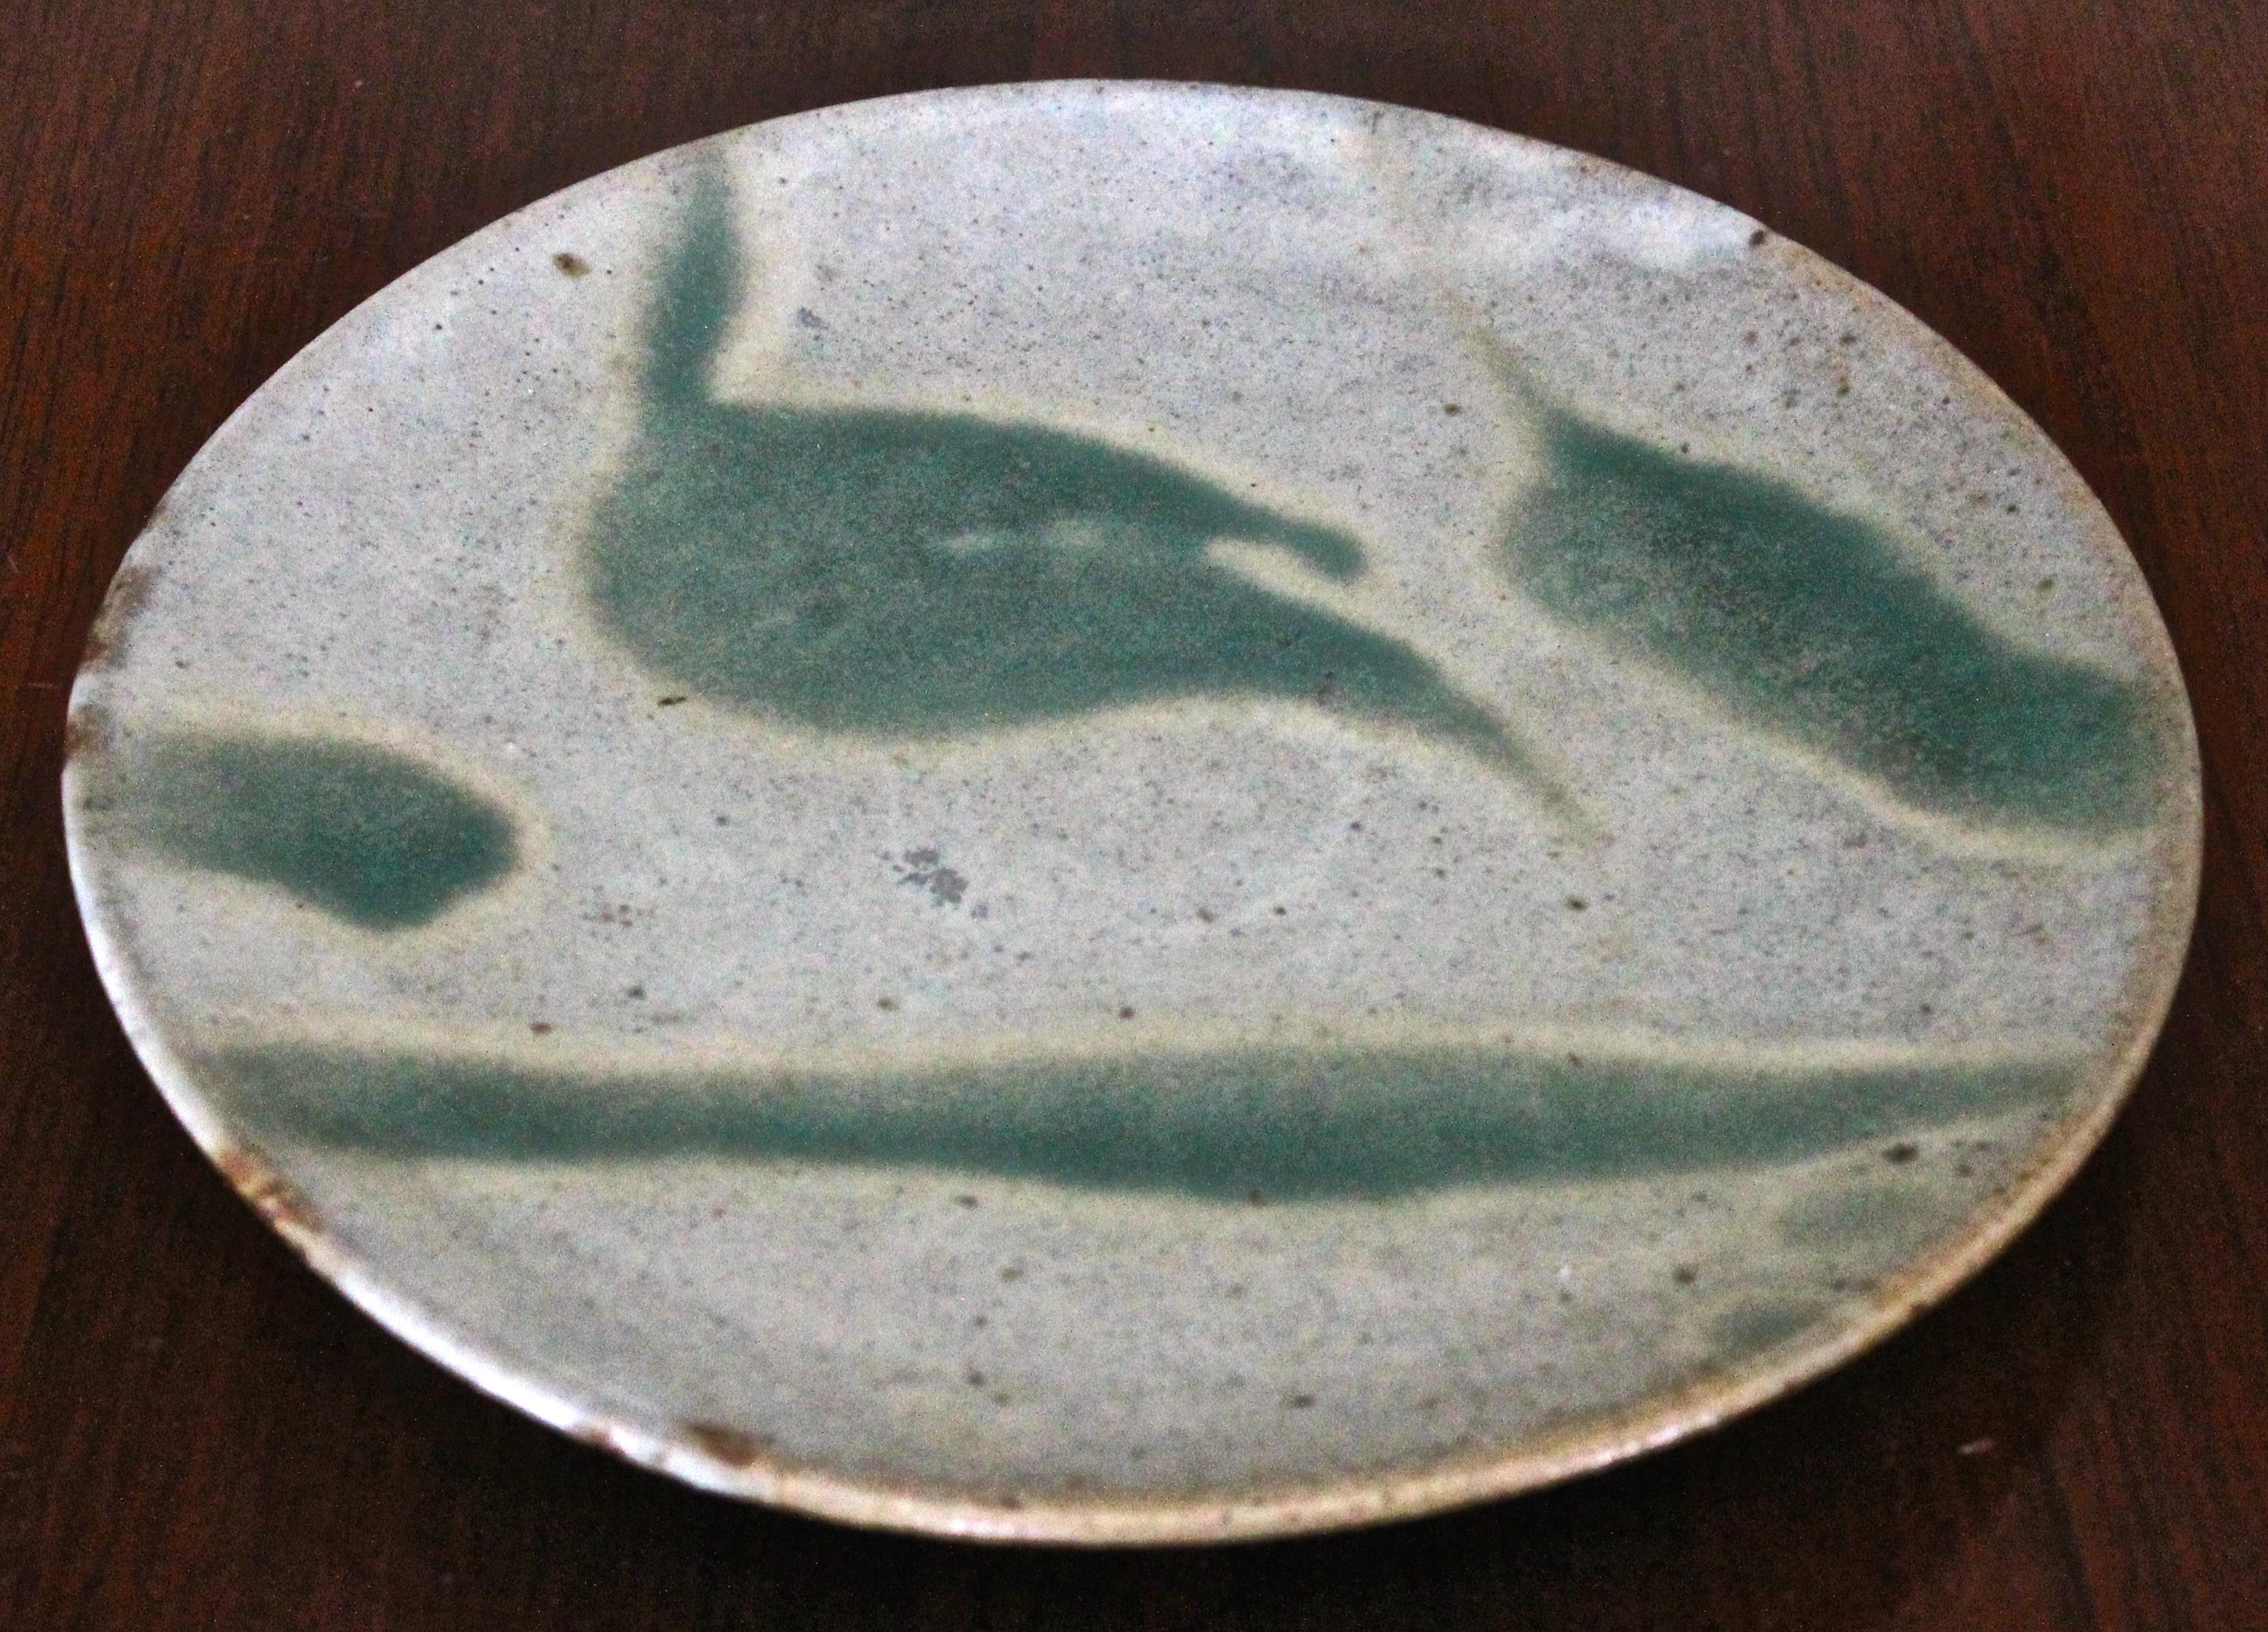 Important unique plate, hand painted green on light grey. Old label on bottom reads 'Hamada Plate'.